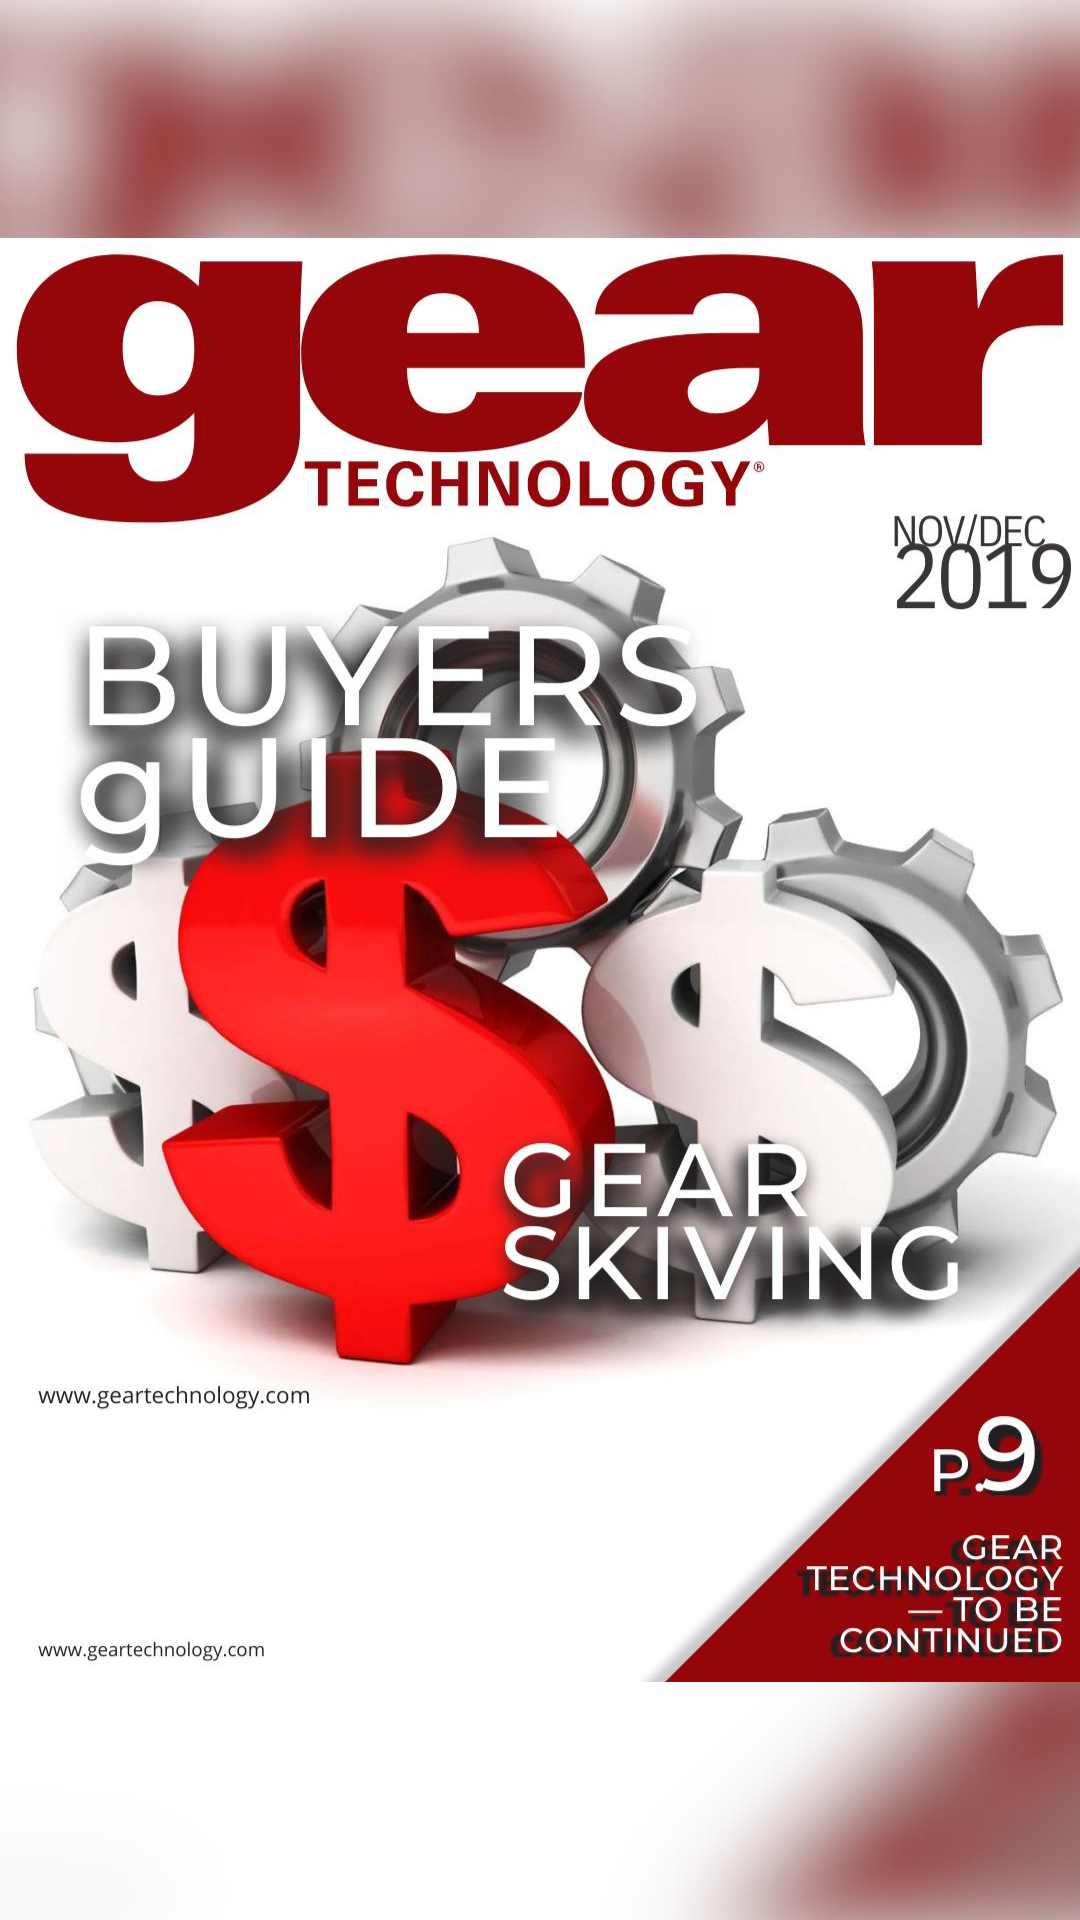 Front cover of Gear Technology Nov/Dec 2019 Buyers Guide Gear Skiving Magazine.